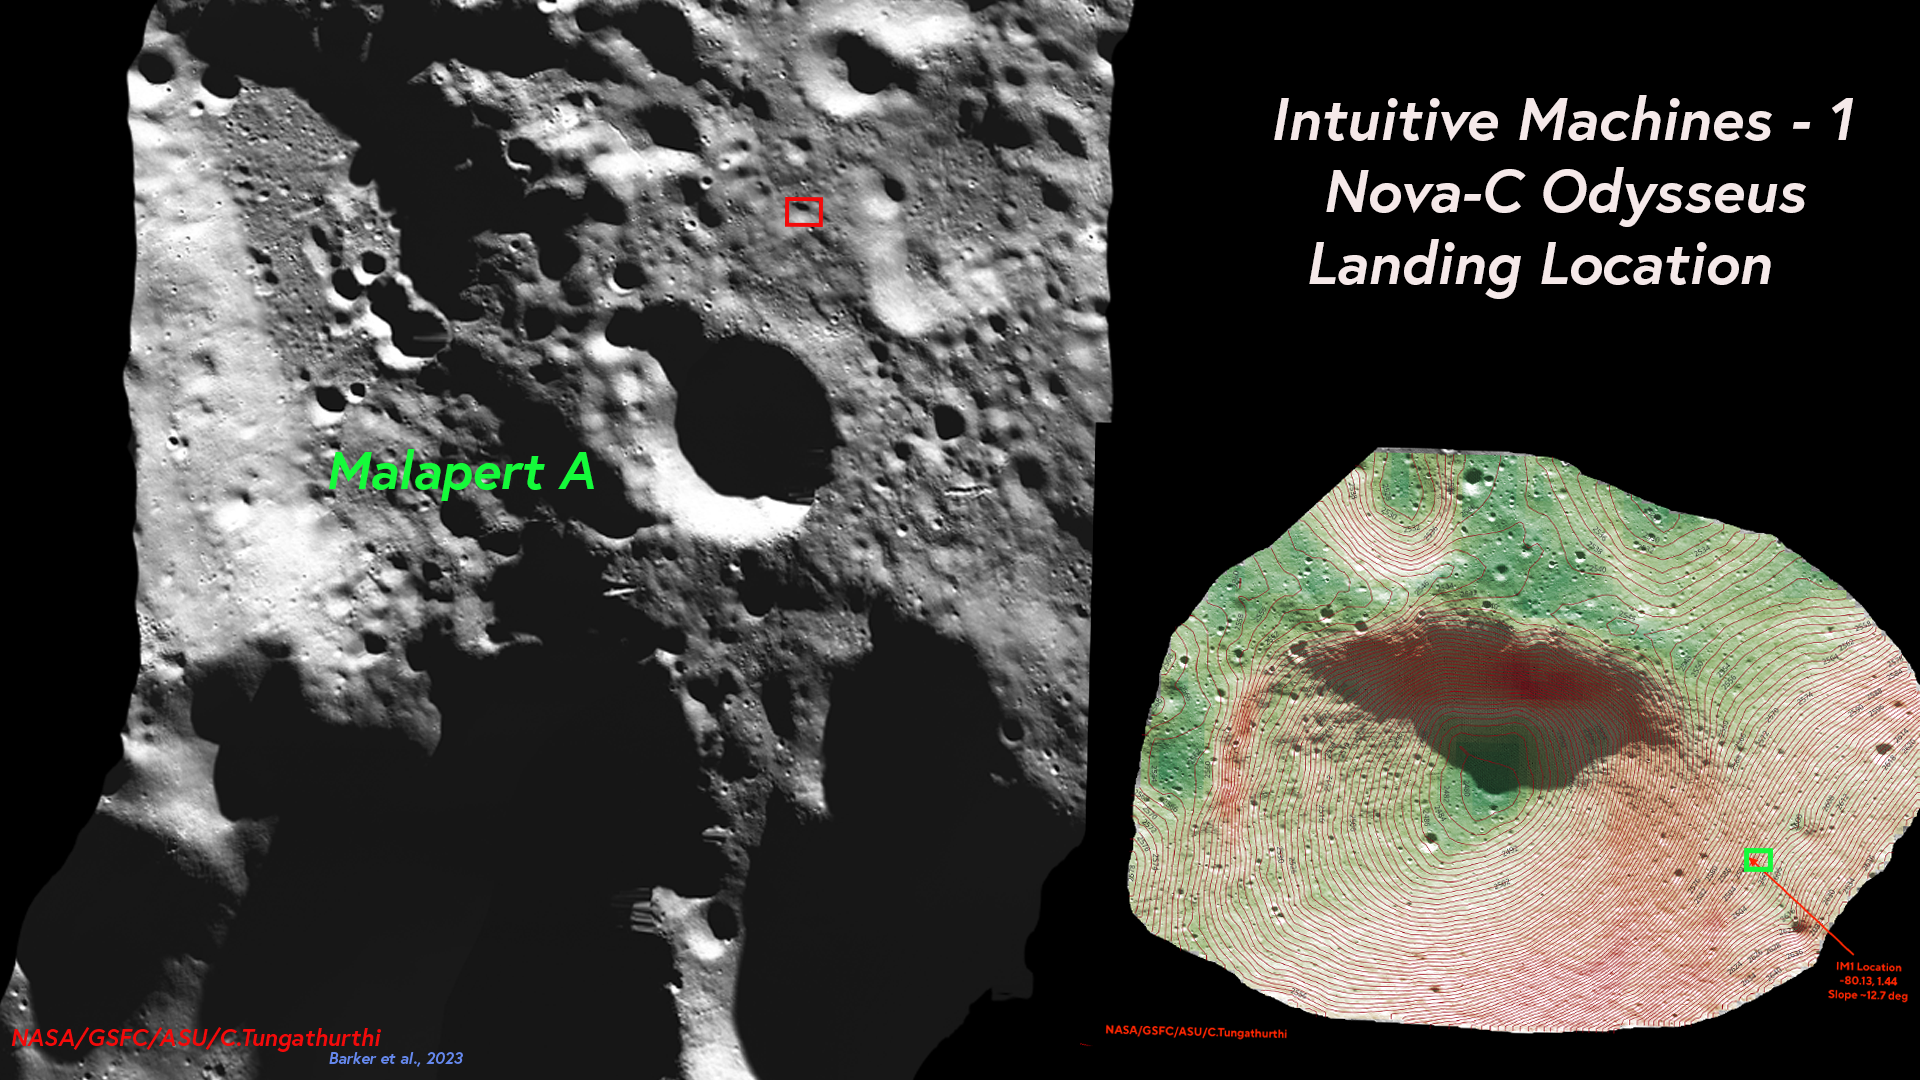 Post-Landing Terrain Assessment of the Intuitive Machines-1 Landing Site